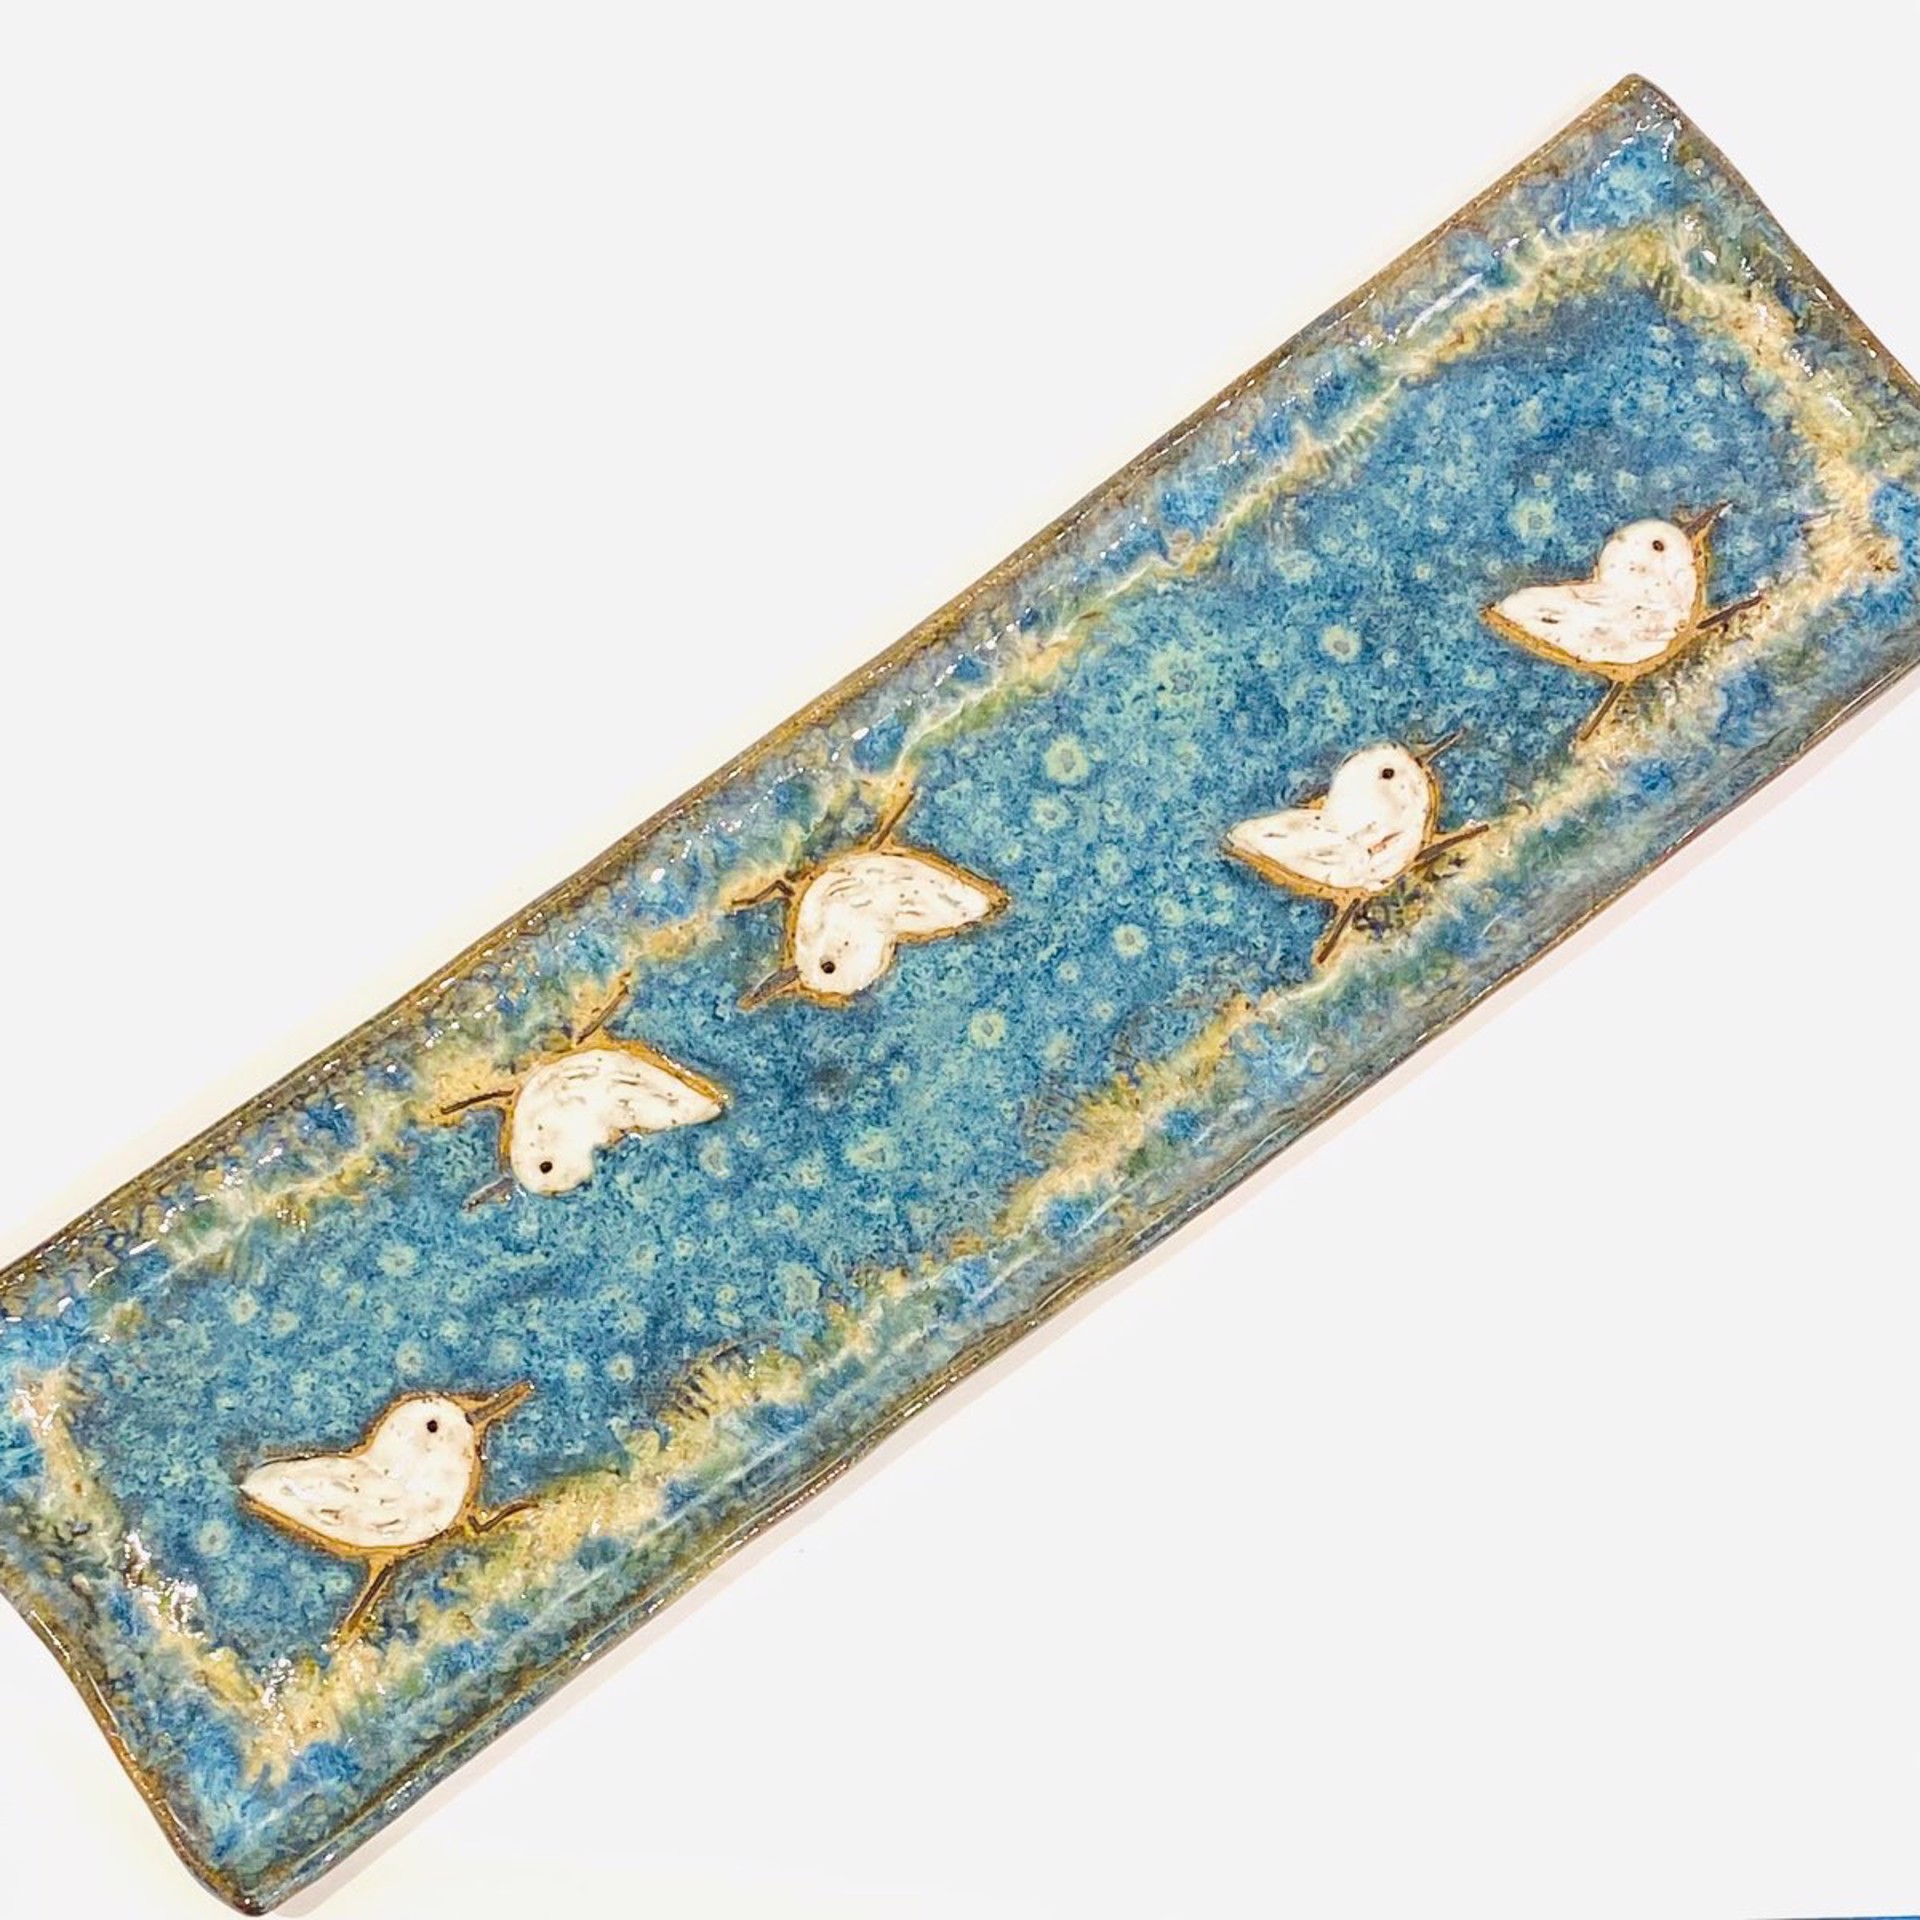 LG22-920 Rectangle Plate with 5 Sandpipers (Blue Glaze) by Jim & Steffi Logan